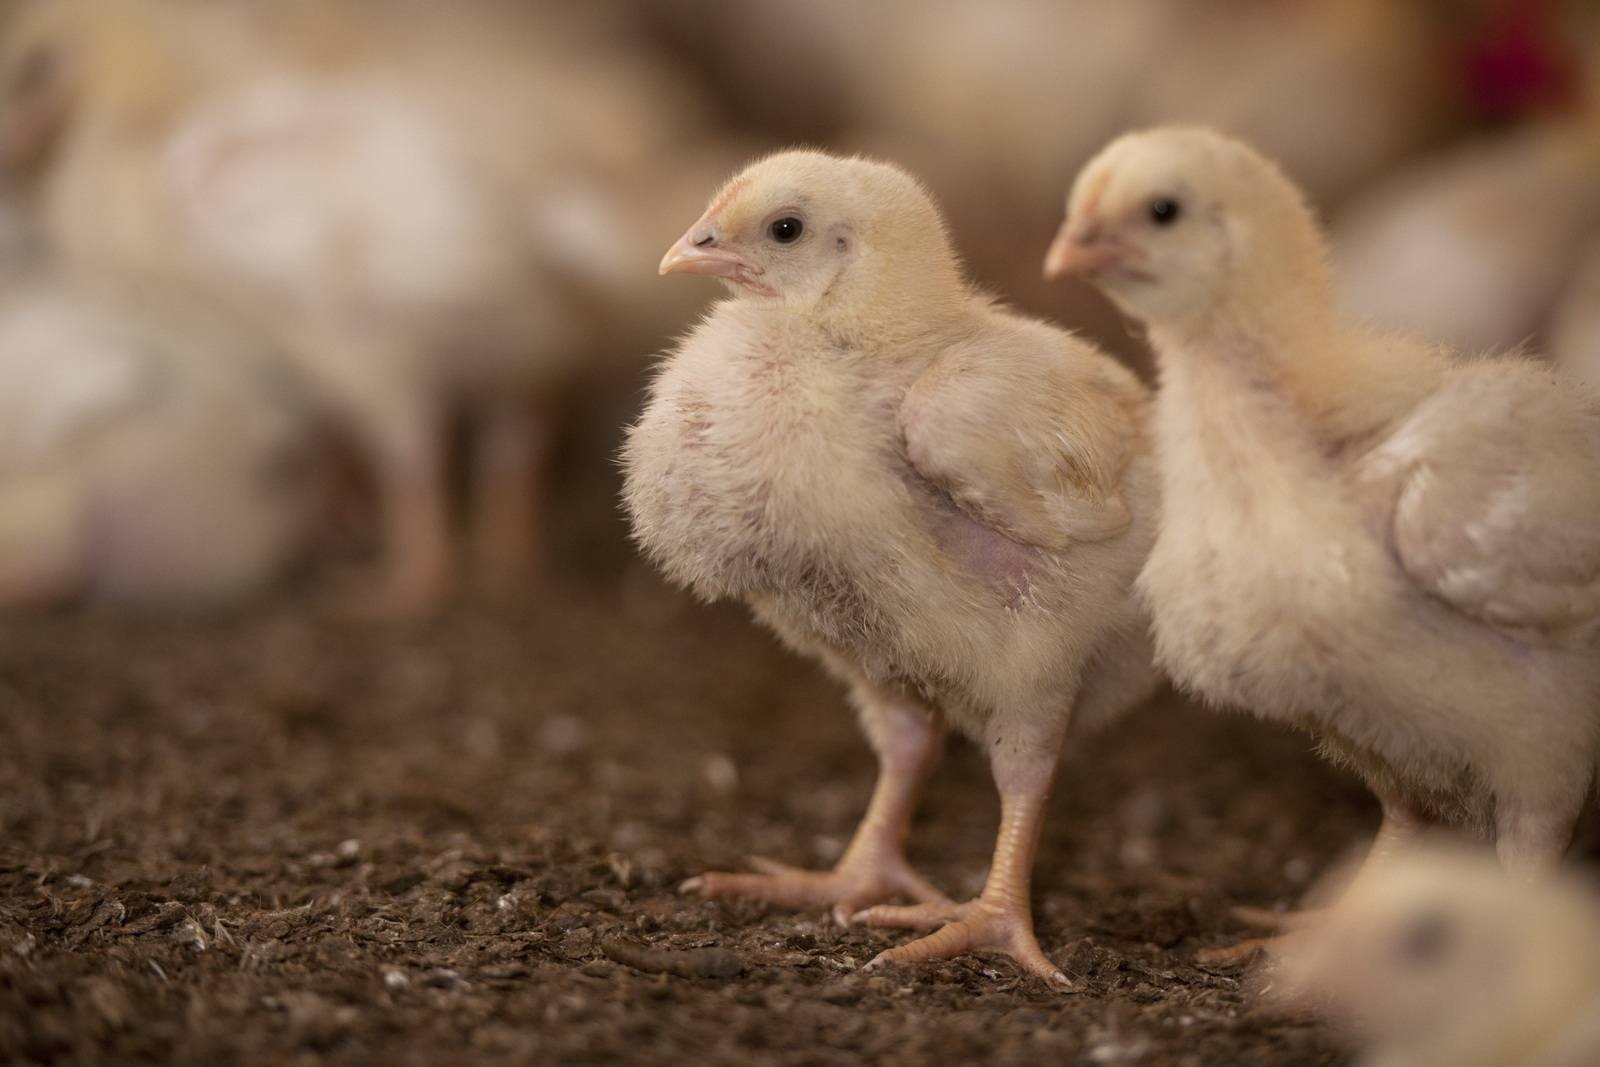 EFSA opinion on Lactobacillus product for broilers